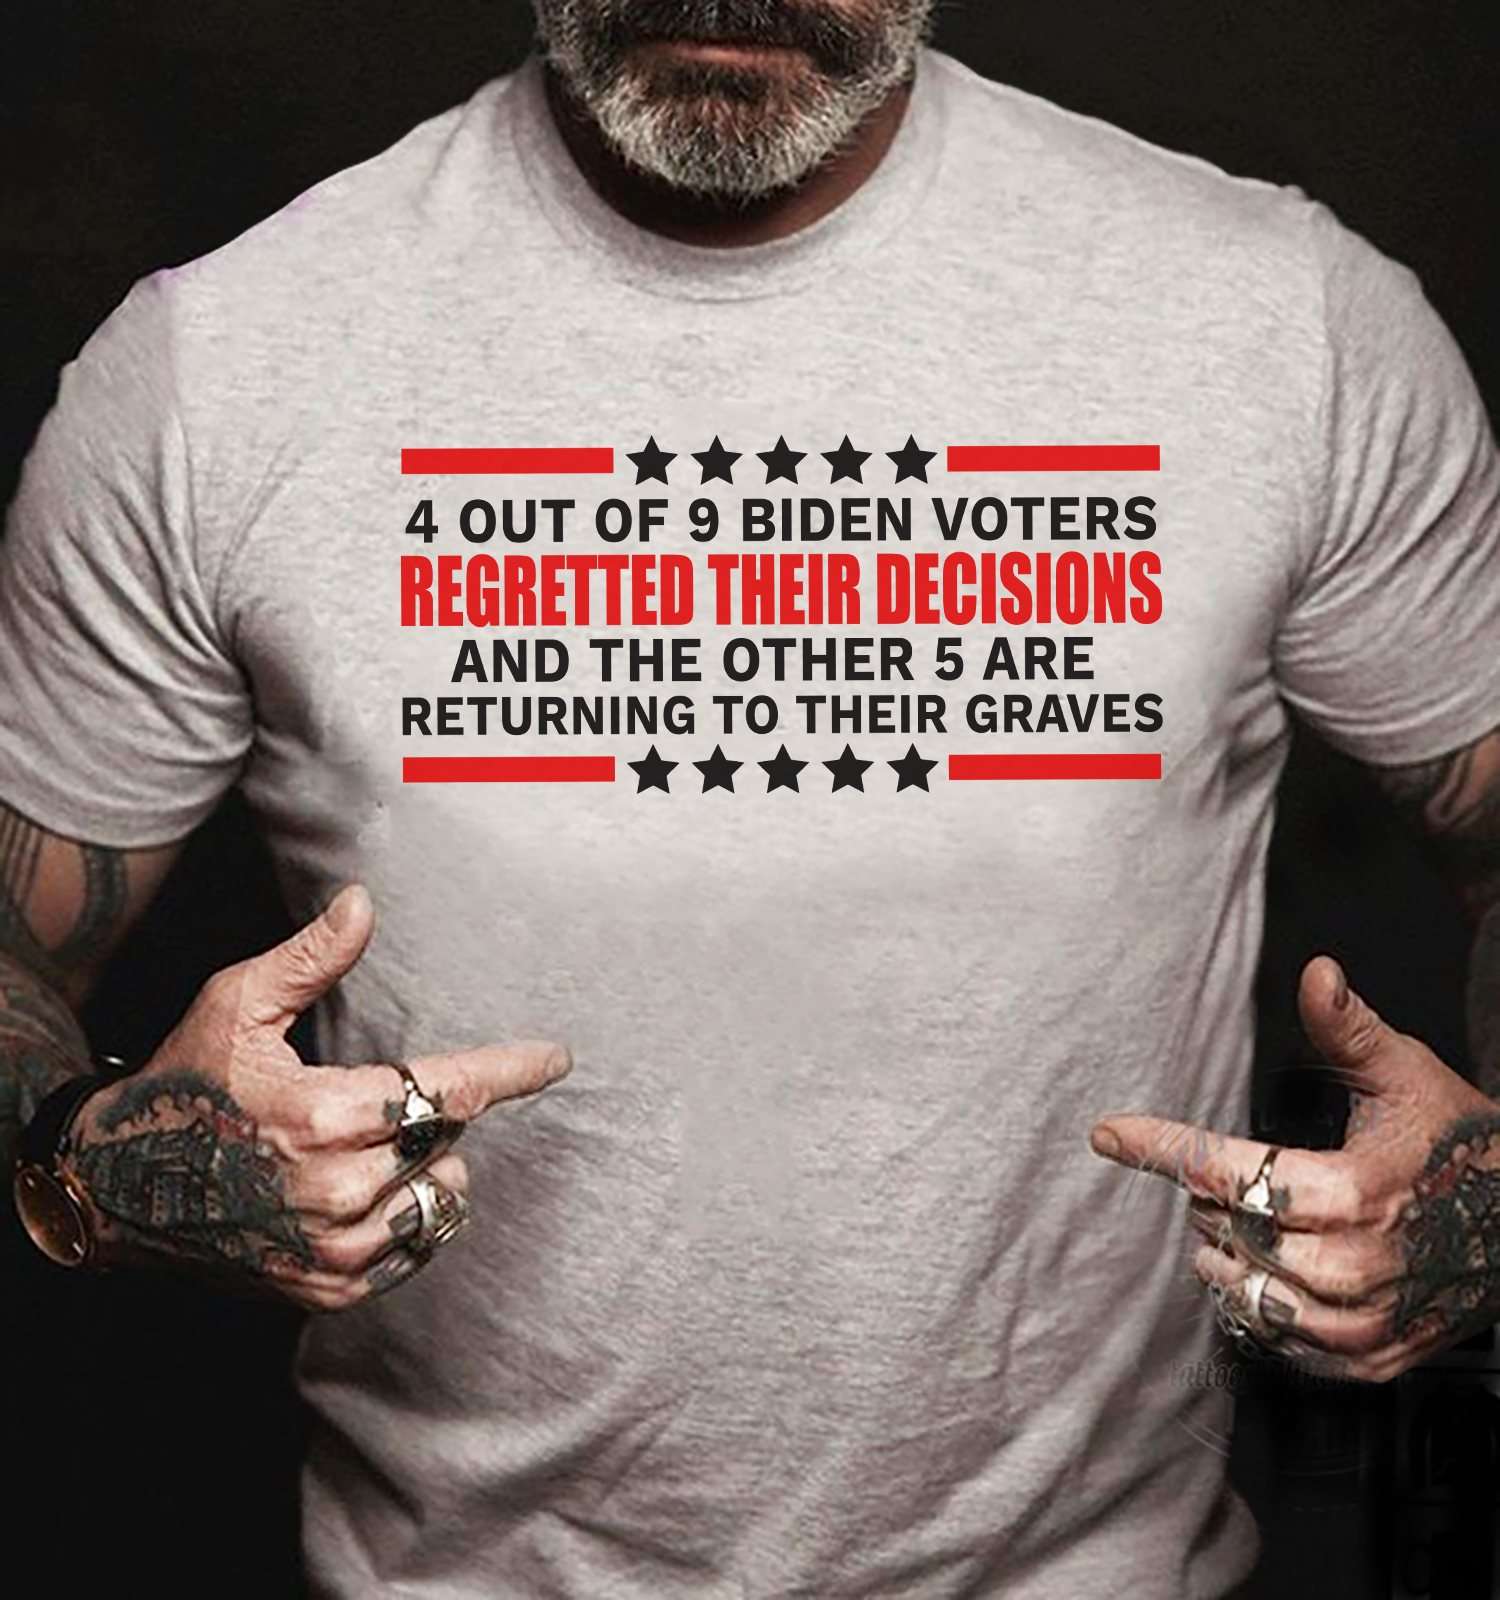 4 out of 9 biden voters regretted their decisions and the other 5 are returning to their graves